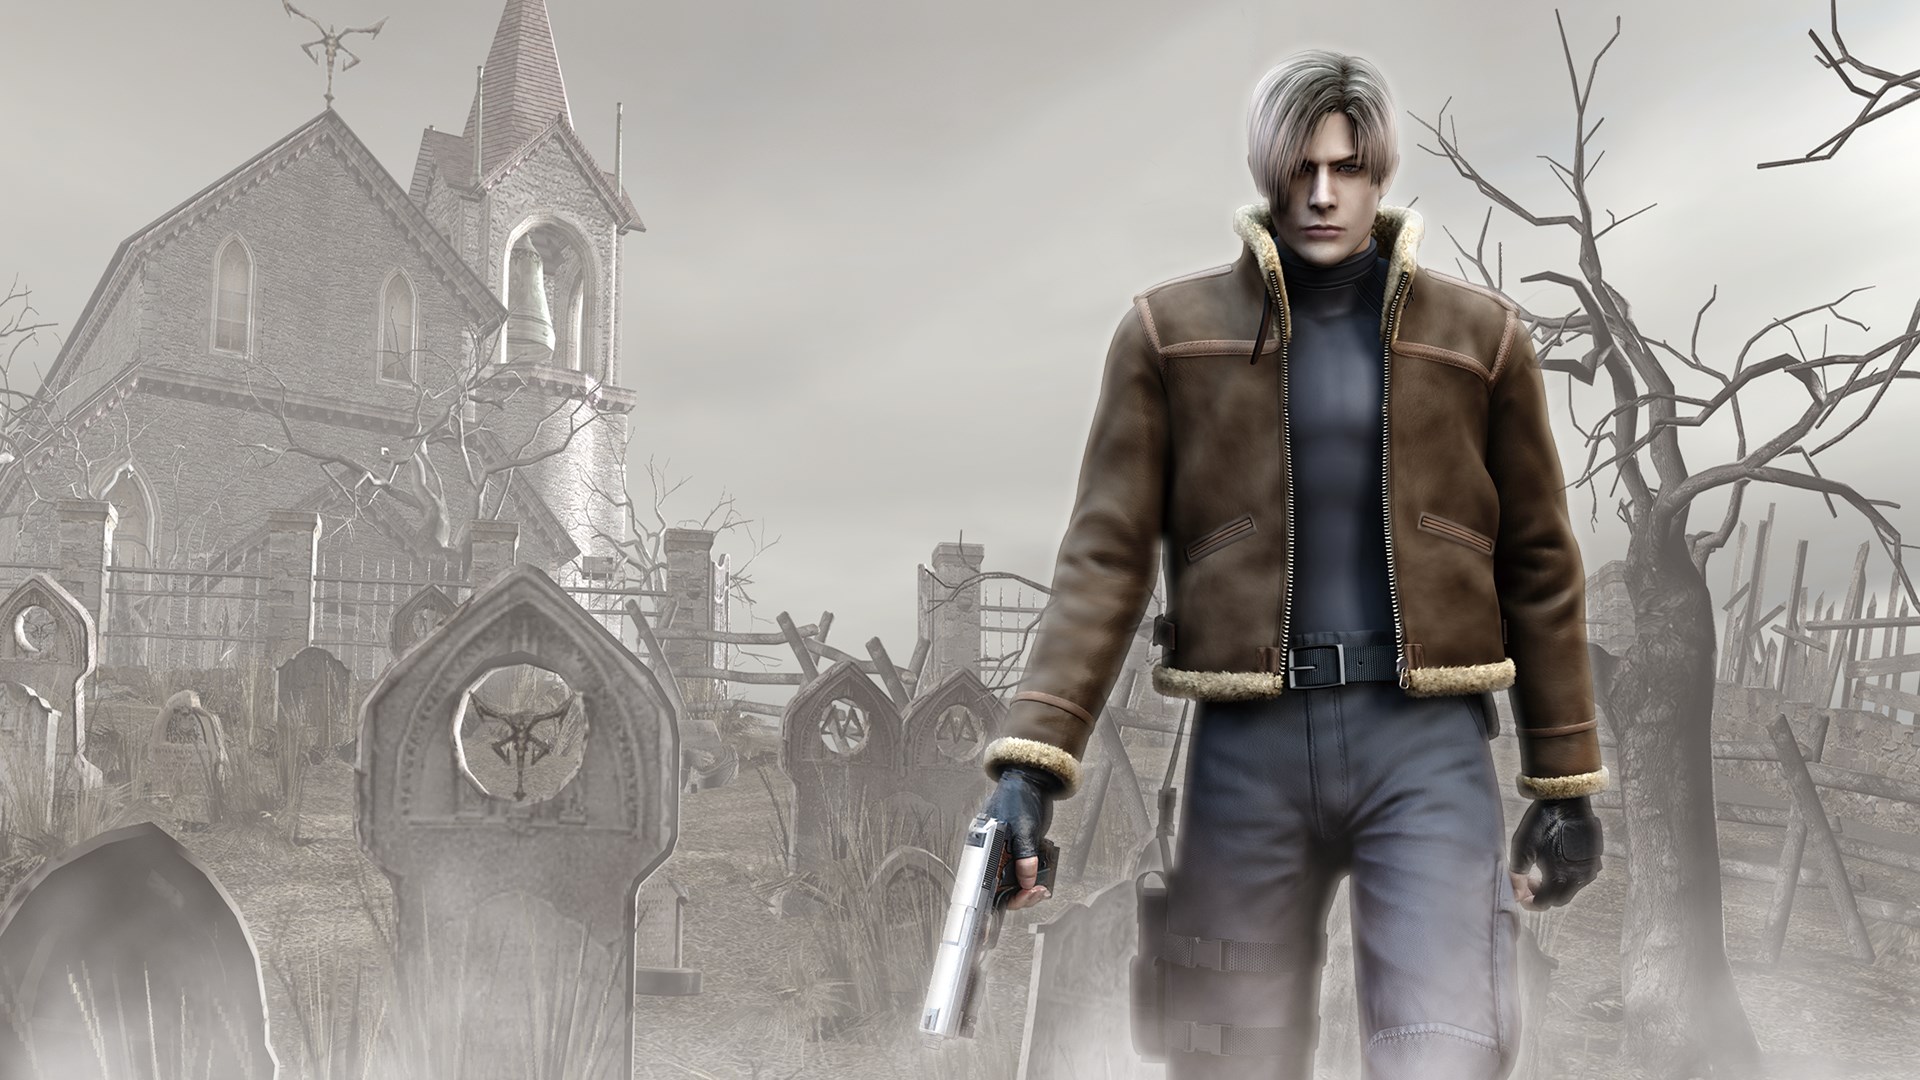 Free Downloads PC Games And Softwares: Resident Evil 4 PC Game Free Download…